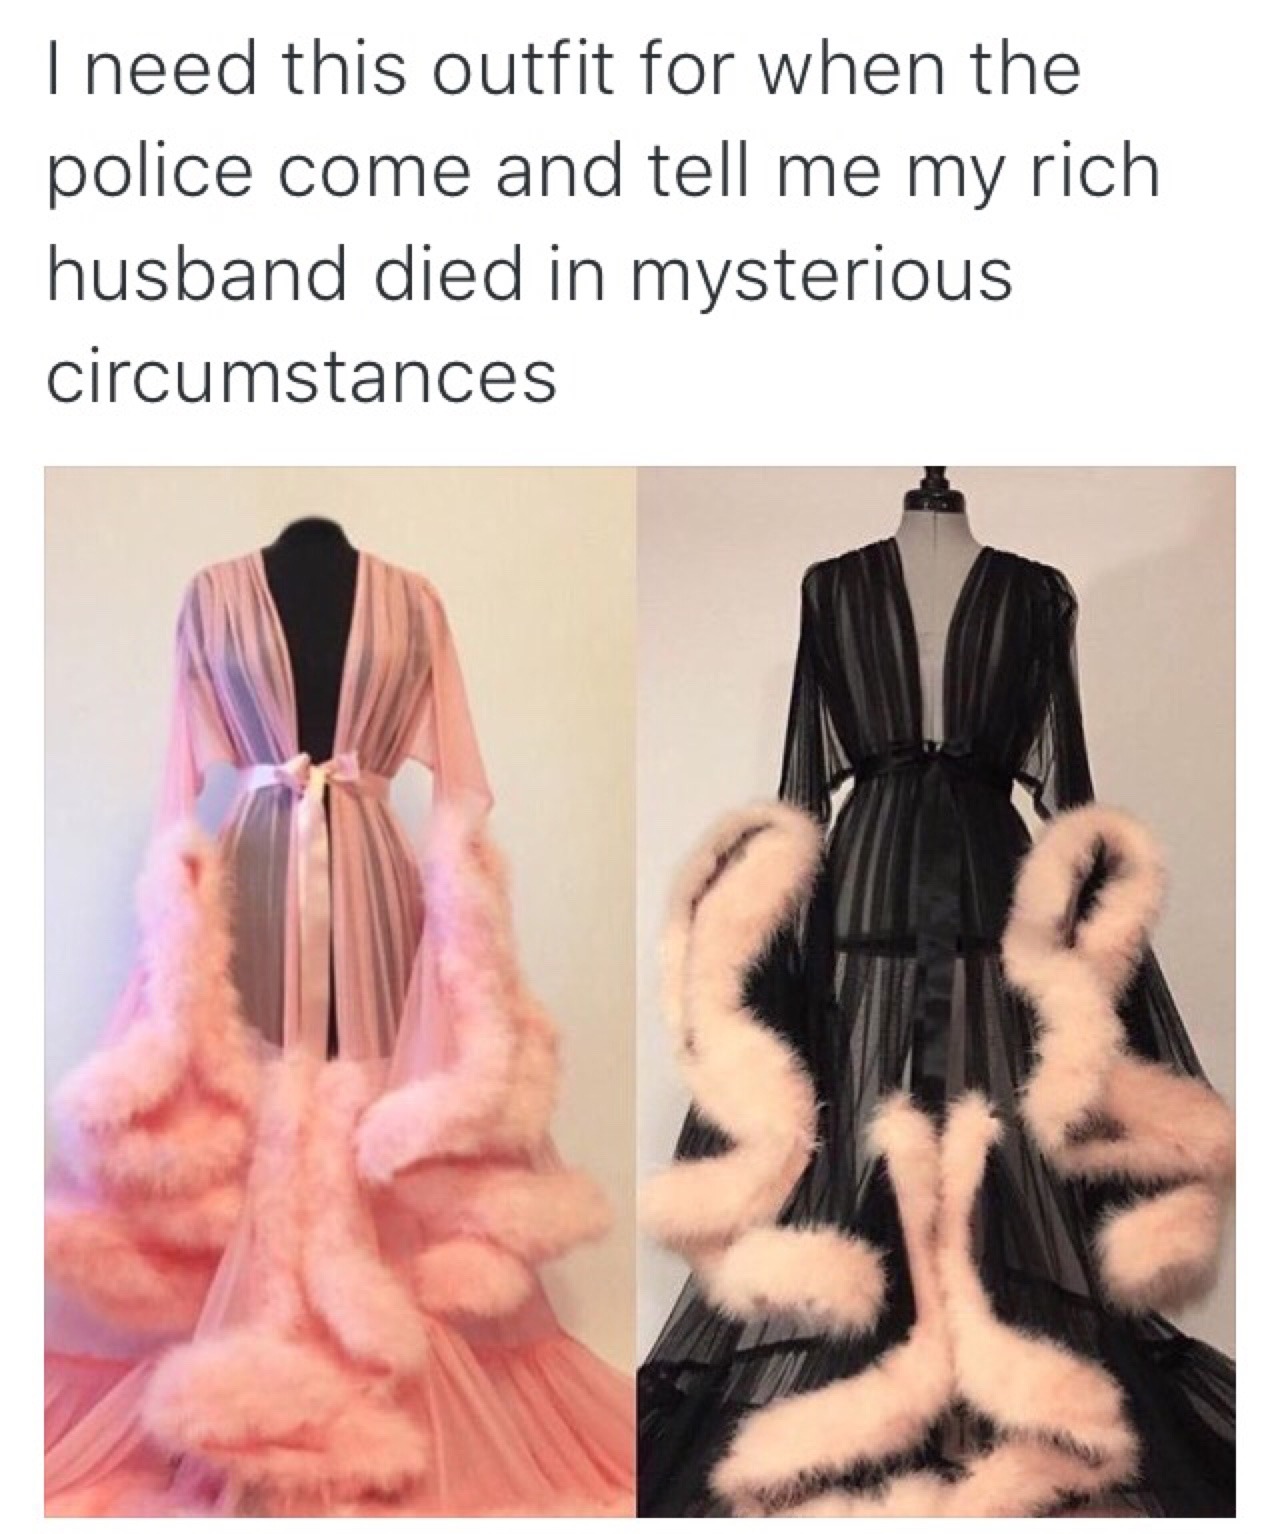 catsaresocuteicanteven:You walk out in the pink one, listen to the police, gasp demurely,